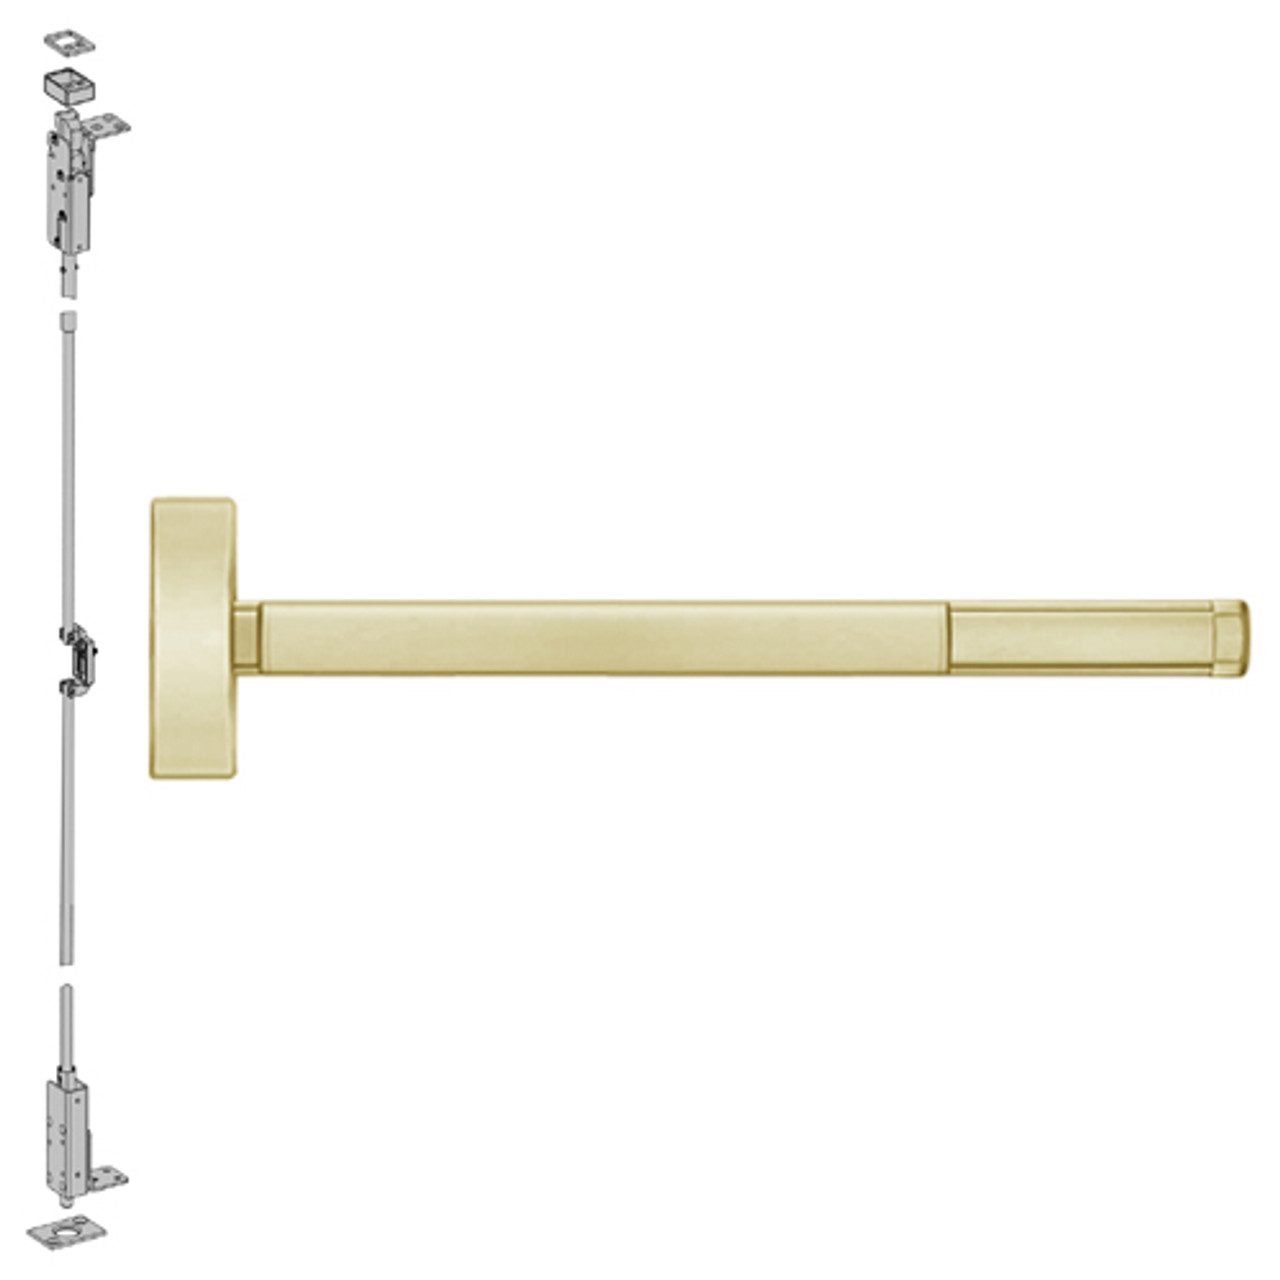 TSFL2703LBR-606-36 PHI 2700 Series Wood Door Concealed Vertical Exit Device with Touchbar Monitoring Switch Prepped for Key Retracts Latchbolt in Satin Brass Finish